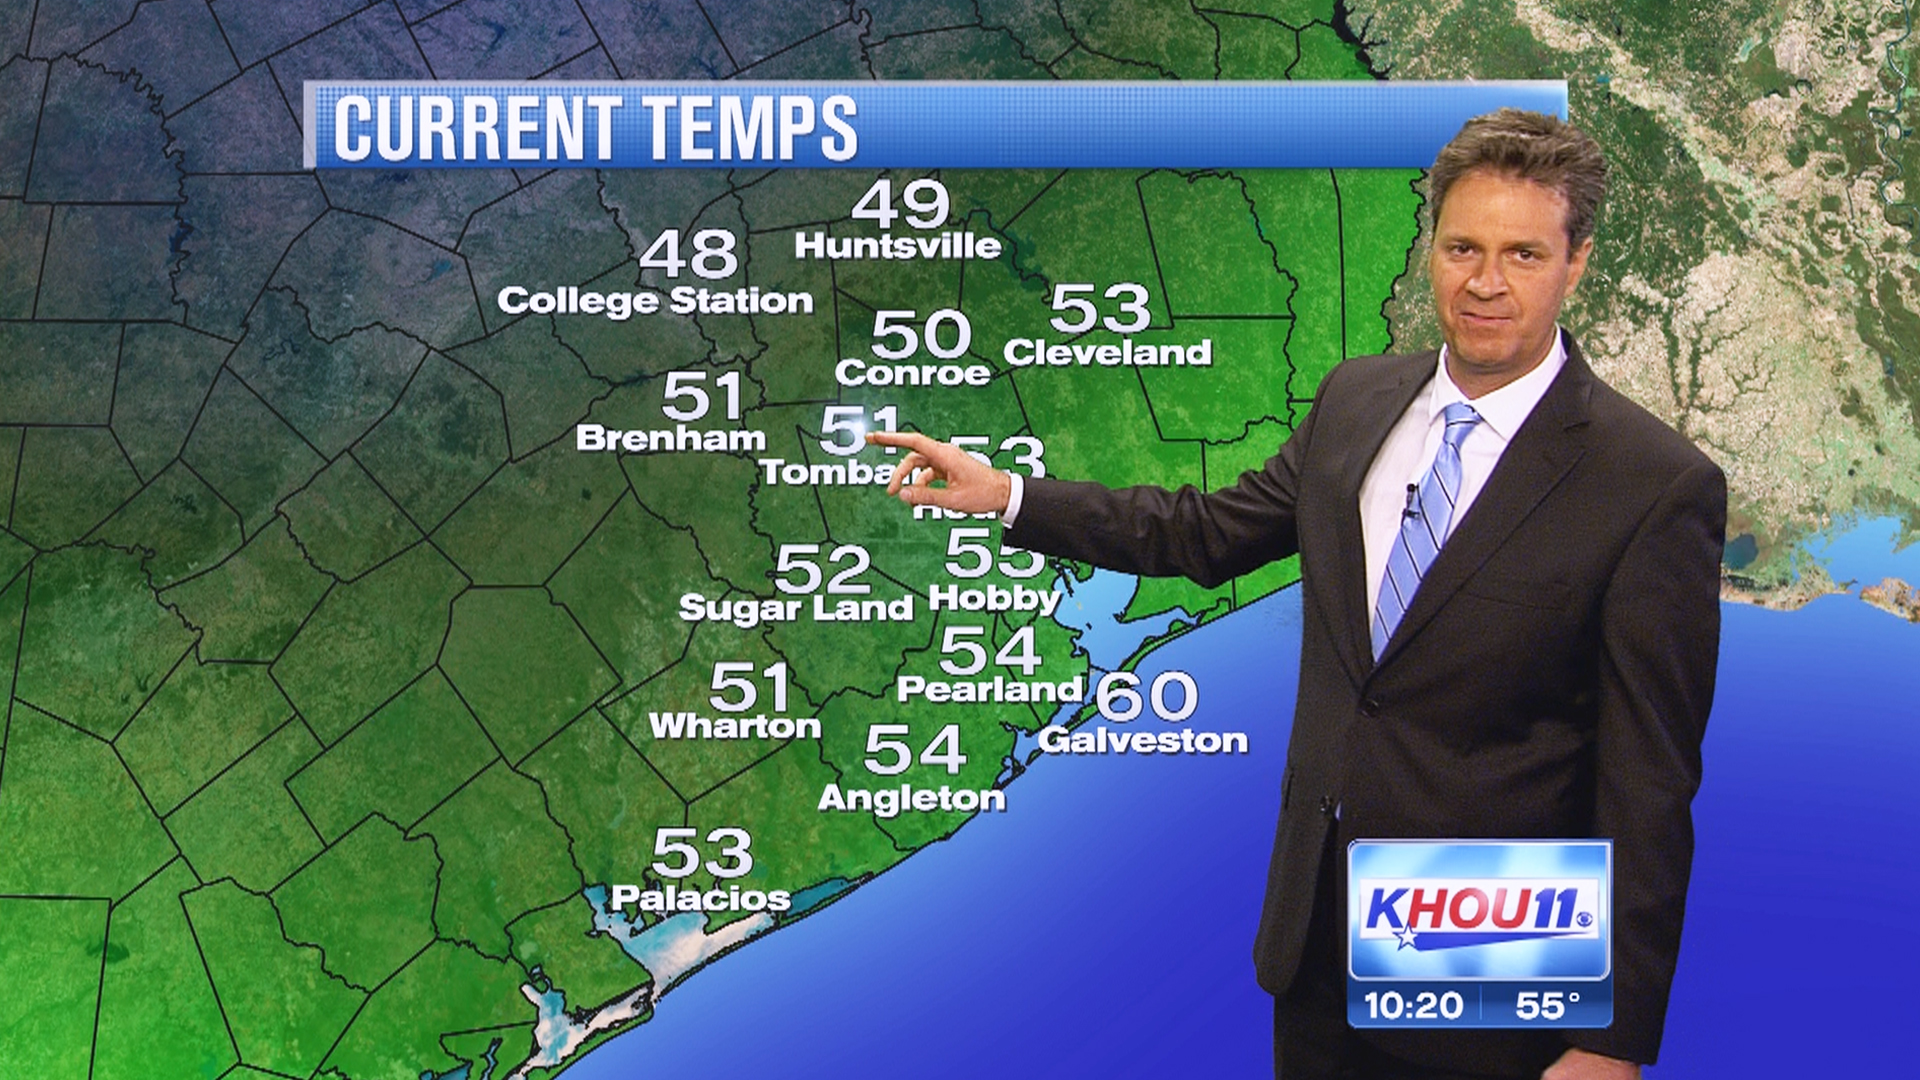 KHOU's weatherman hiccups his way to national fame